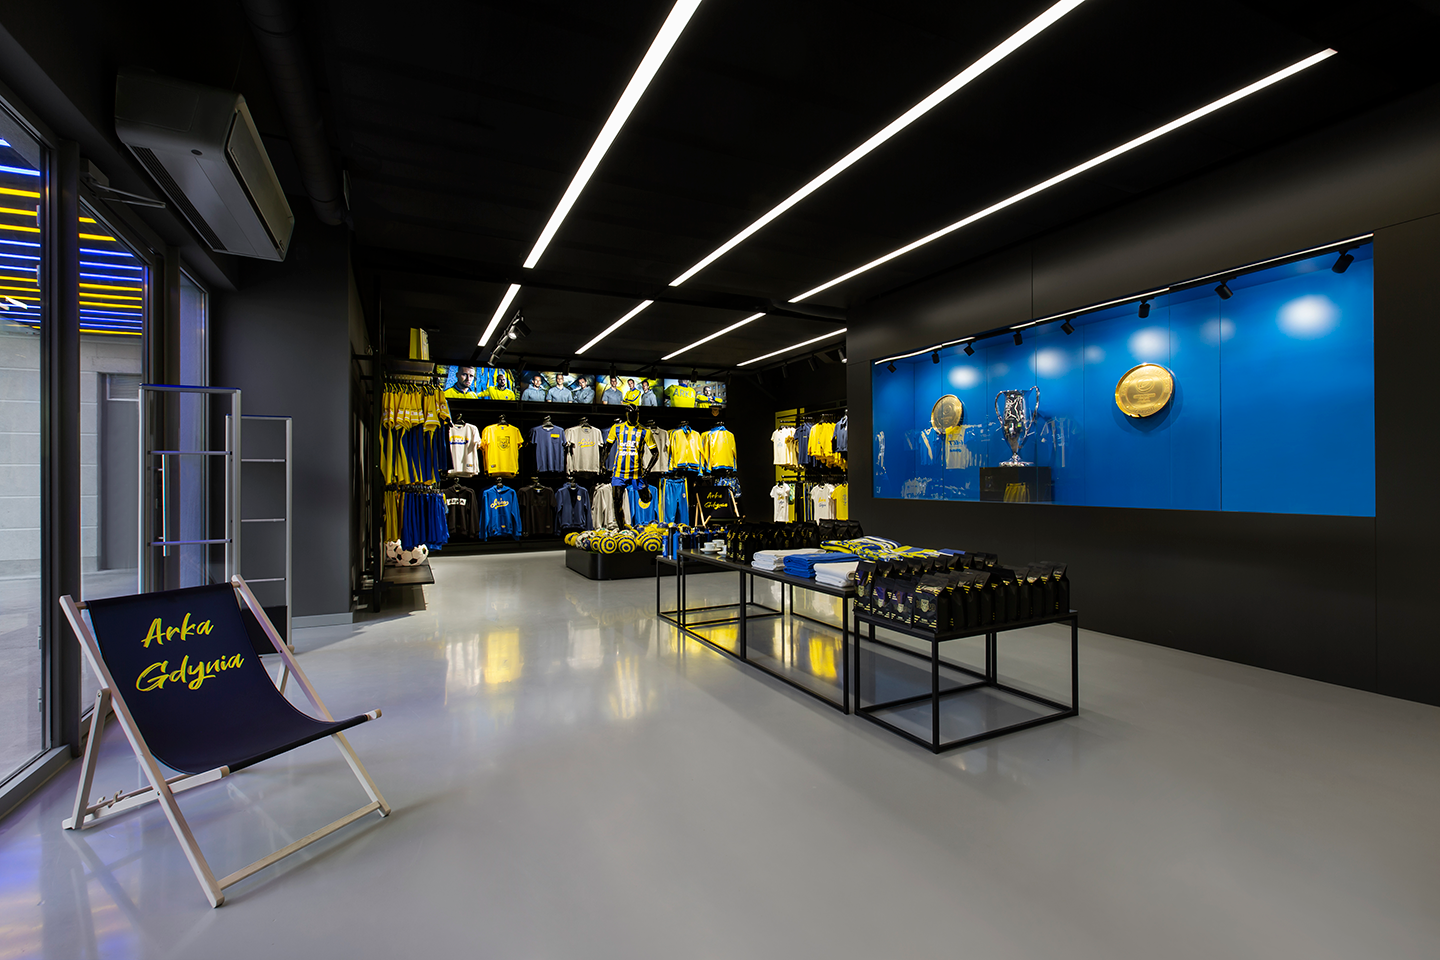 ARKA GDYNIA STORE IS WELCOMING BACK THEIR FANS | Axis Mason